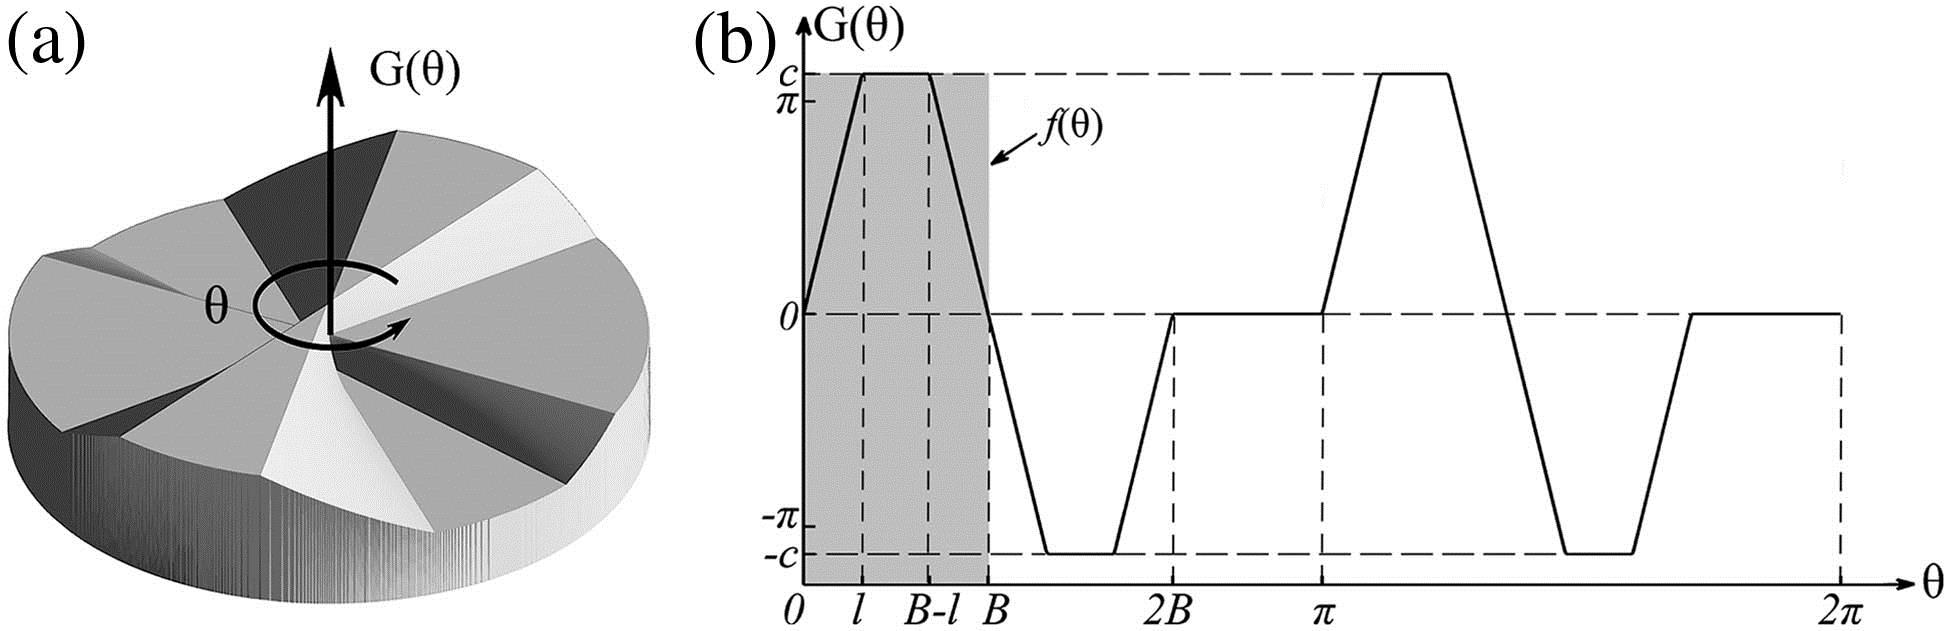 (a) 3D plot of azimuthal phase distribution of the mask; (b) corresponding phase distribution in the azimuthal direction for the designed central wavelength λ0. TPM is double-periodic in the azimuthal direction; each period contains two reversed full trapezoids and one flat region.